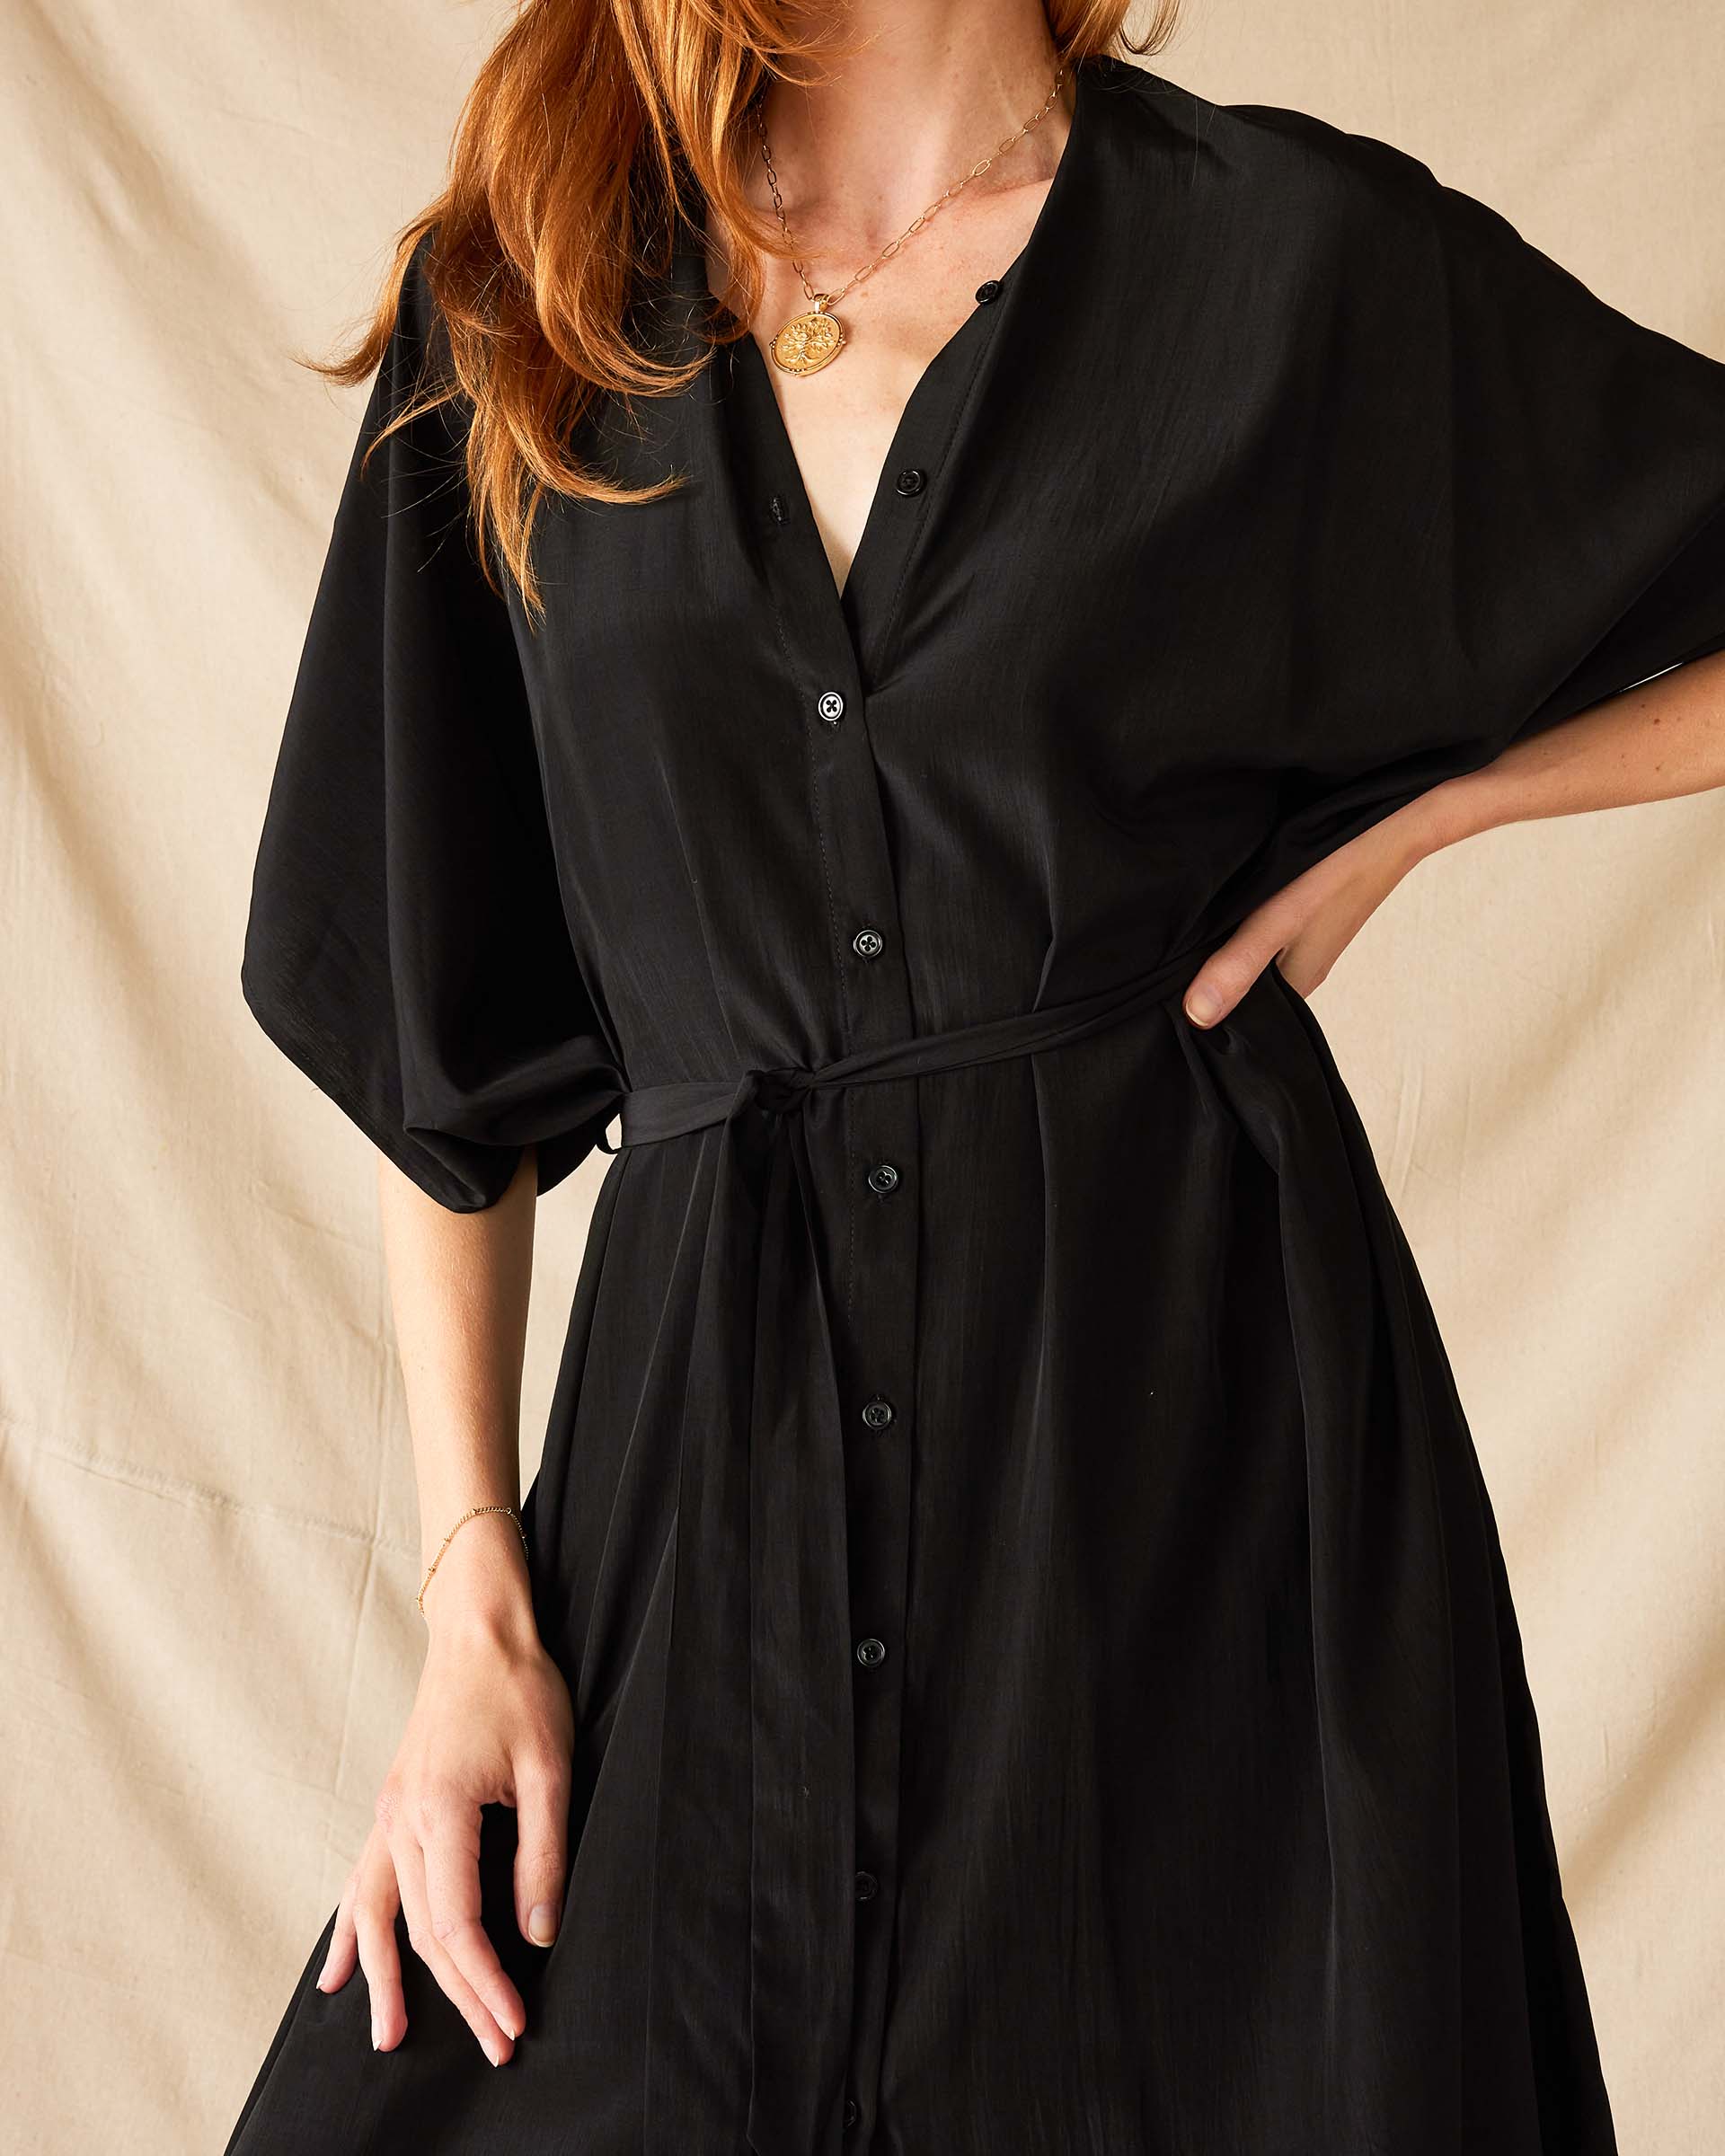 Women's Black Mallorca Kaftan Dress and Coverup With Button-up Front Sleeveless Drop Shoulder and Removable Self Belt 